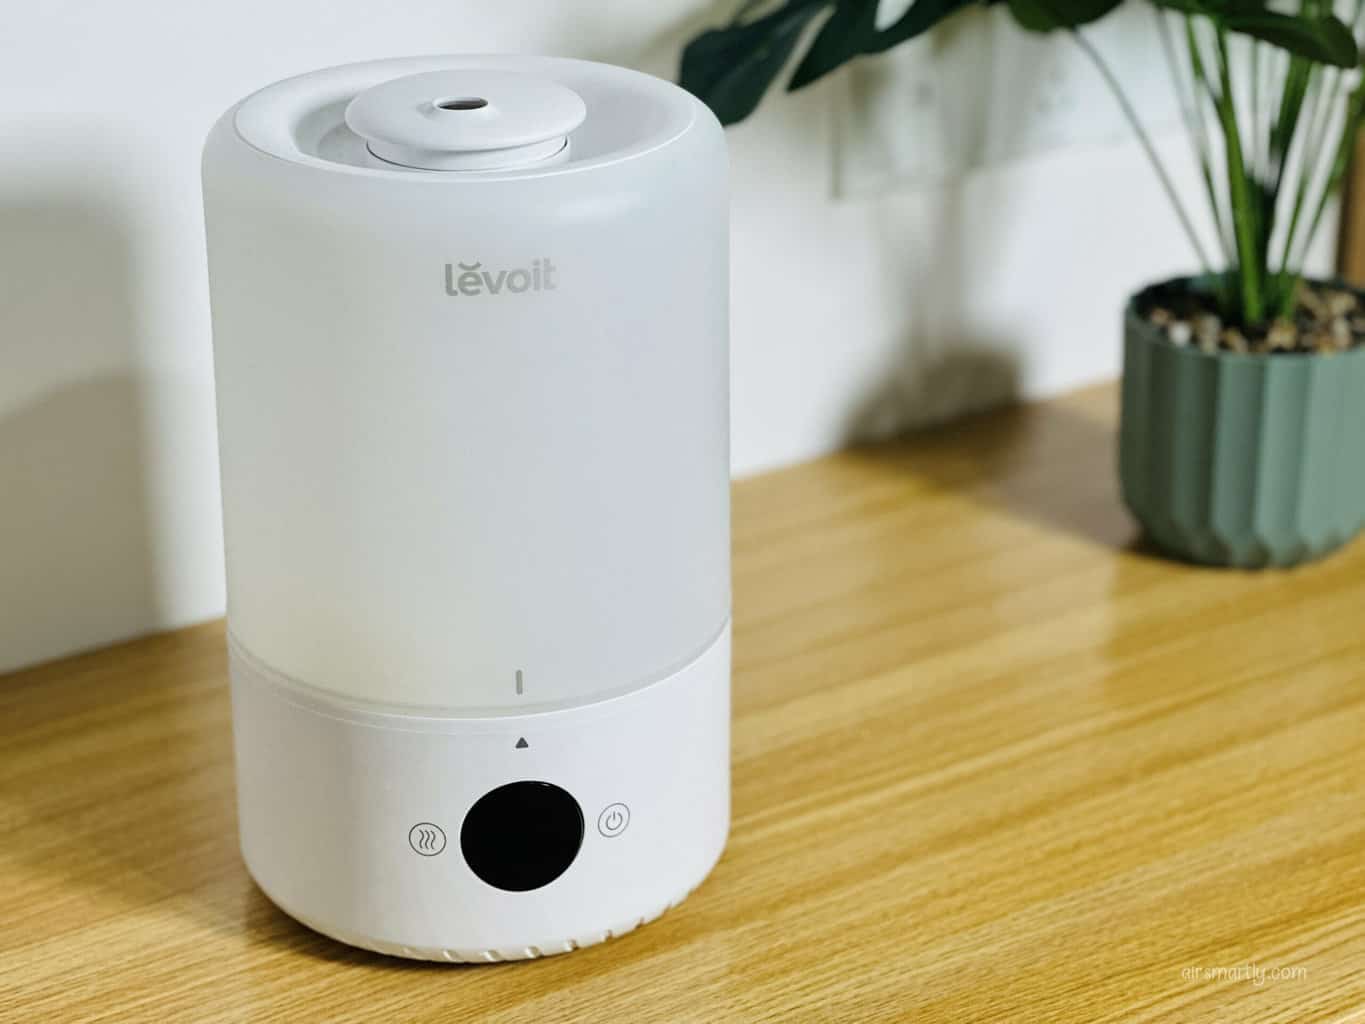 levoit dual 200s humidifier featured image